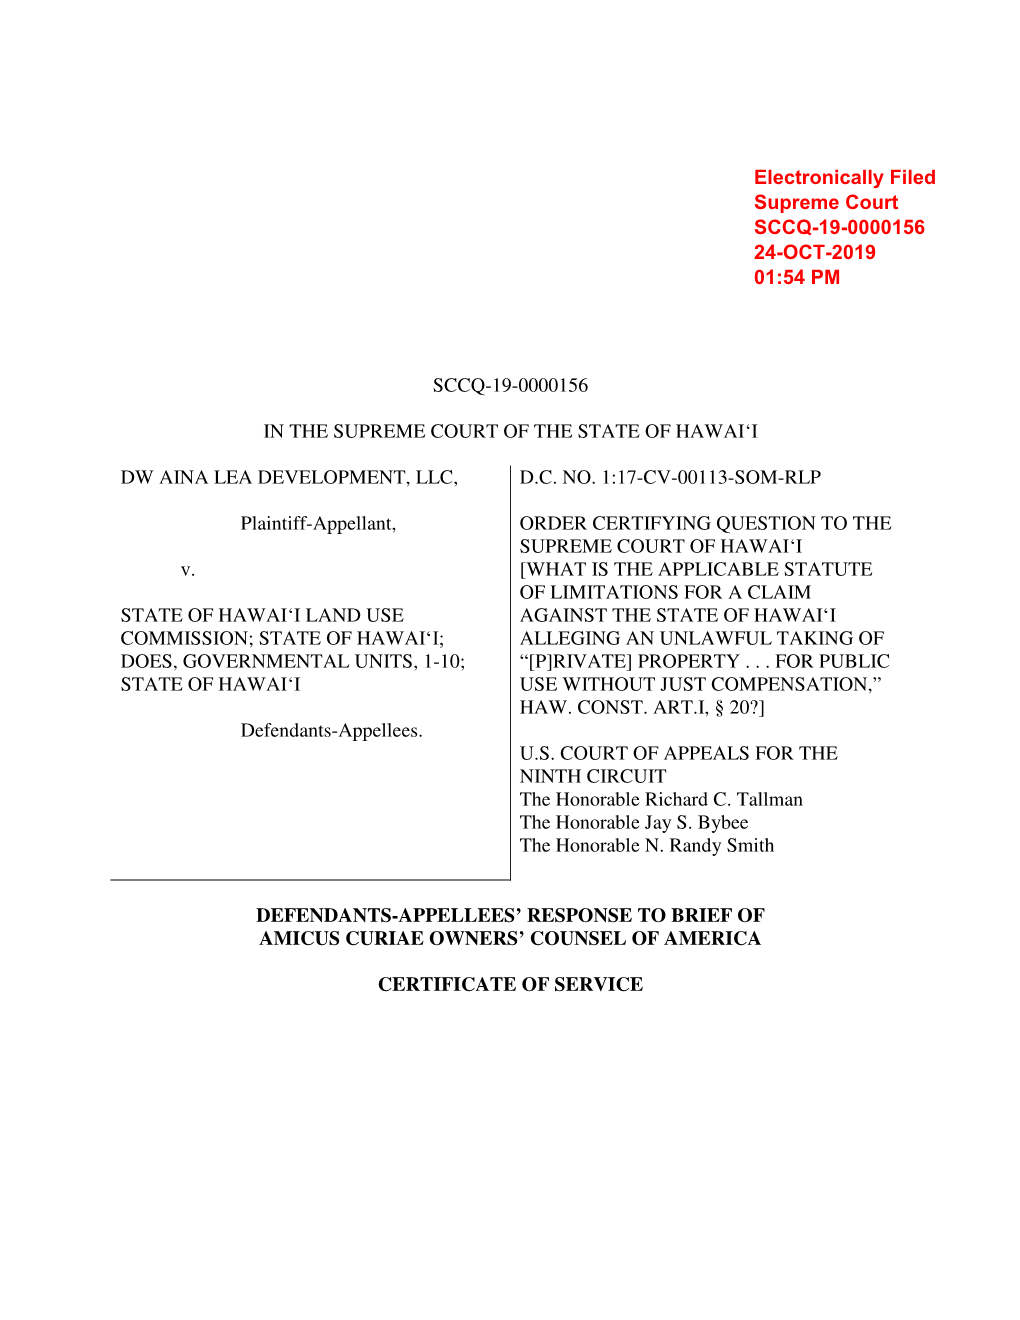 Electronically Filed Supreme Court SCCQ-19-0000156 24-OCT-2019 01:54 PM